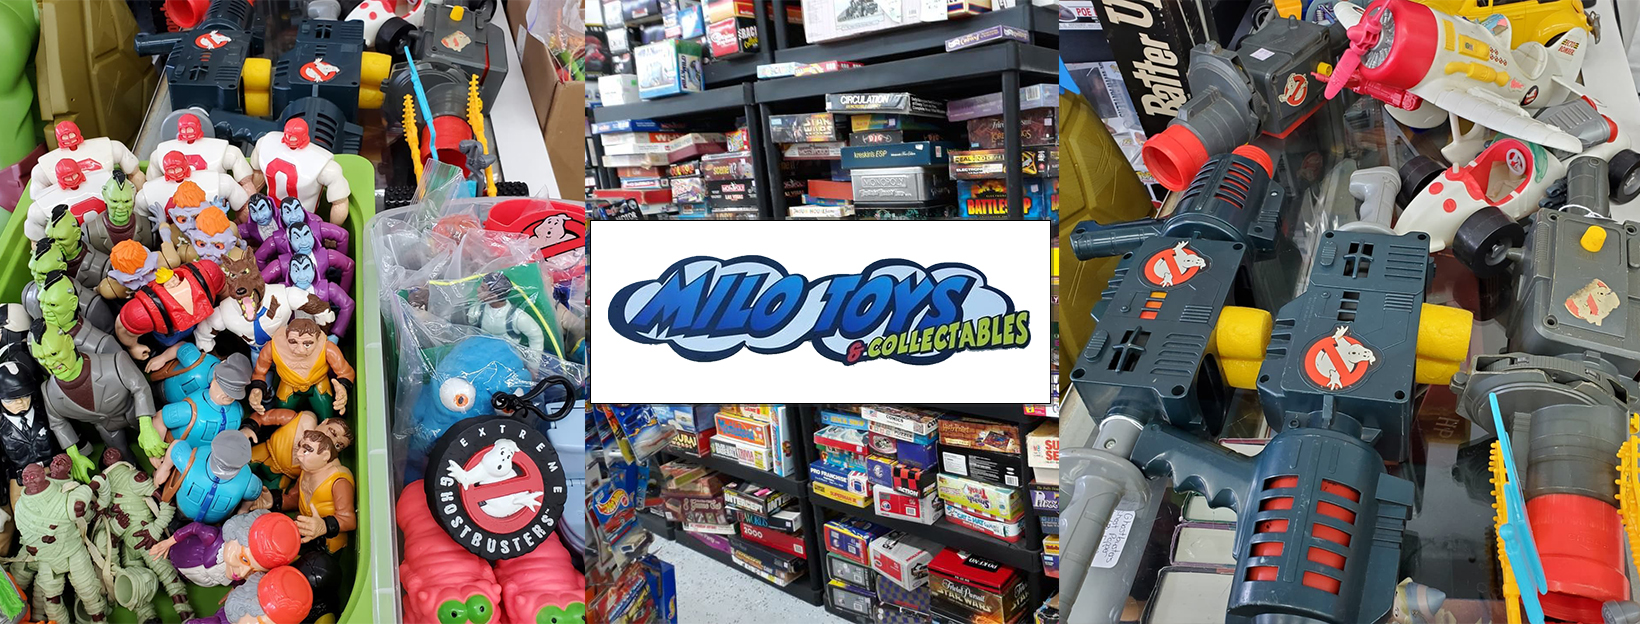 Milo Toys & Collectables 941 Montauk Hwy, Oakdale New York 11769